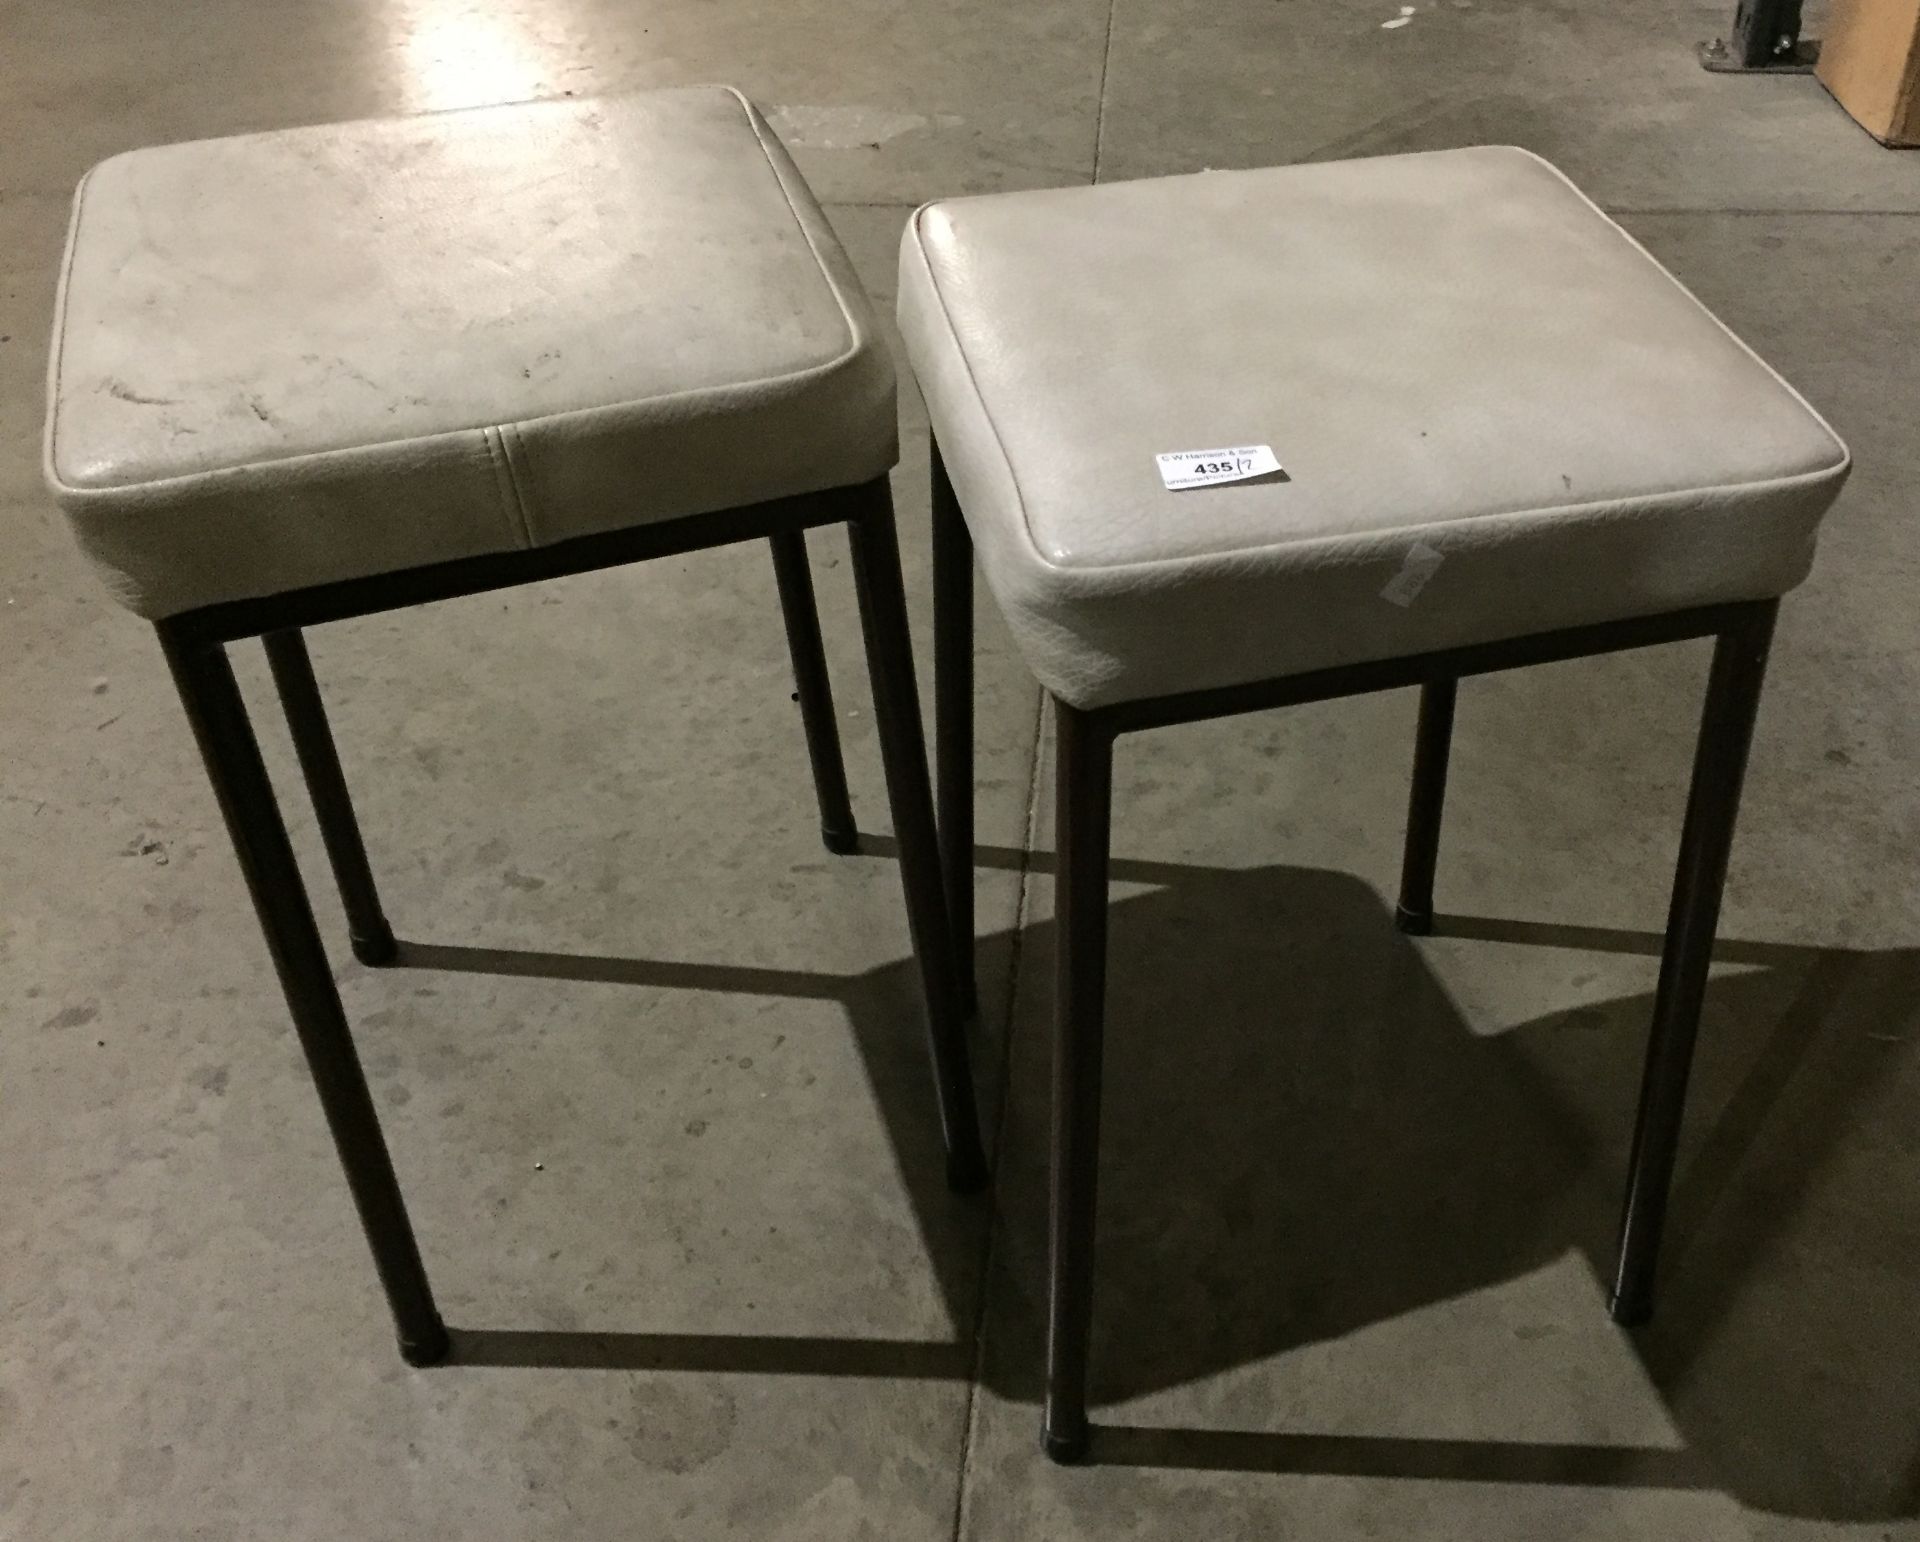 Pair of stools with cream vinyl seats and brown metal legs